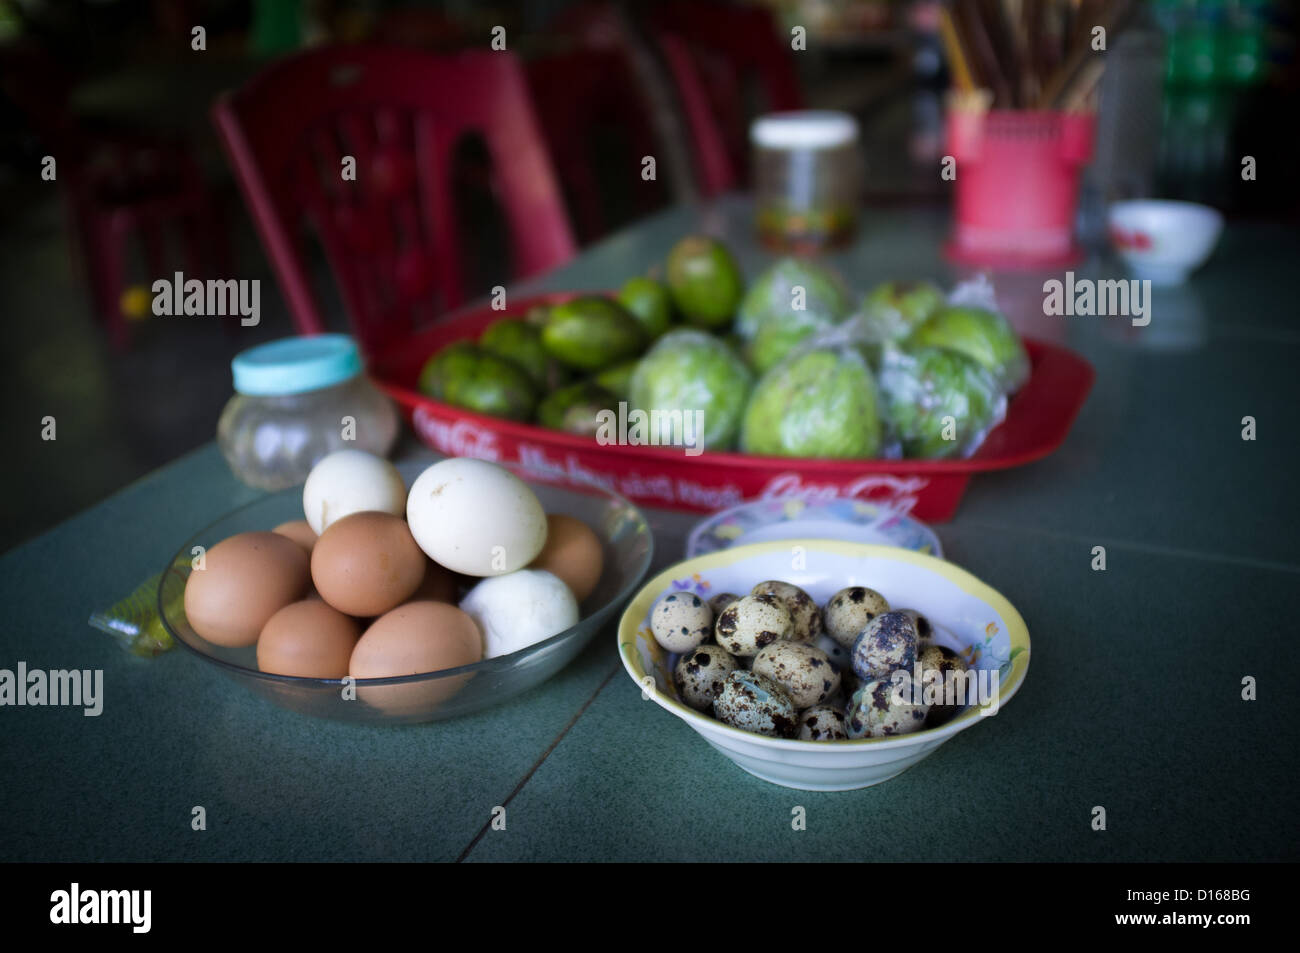 Birds eggs and hens eggs with limes on a roadside cafe table in Vietnam Stock Photo